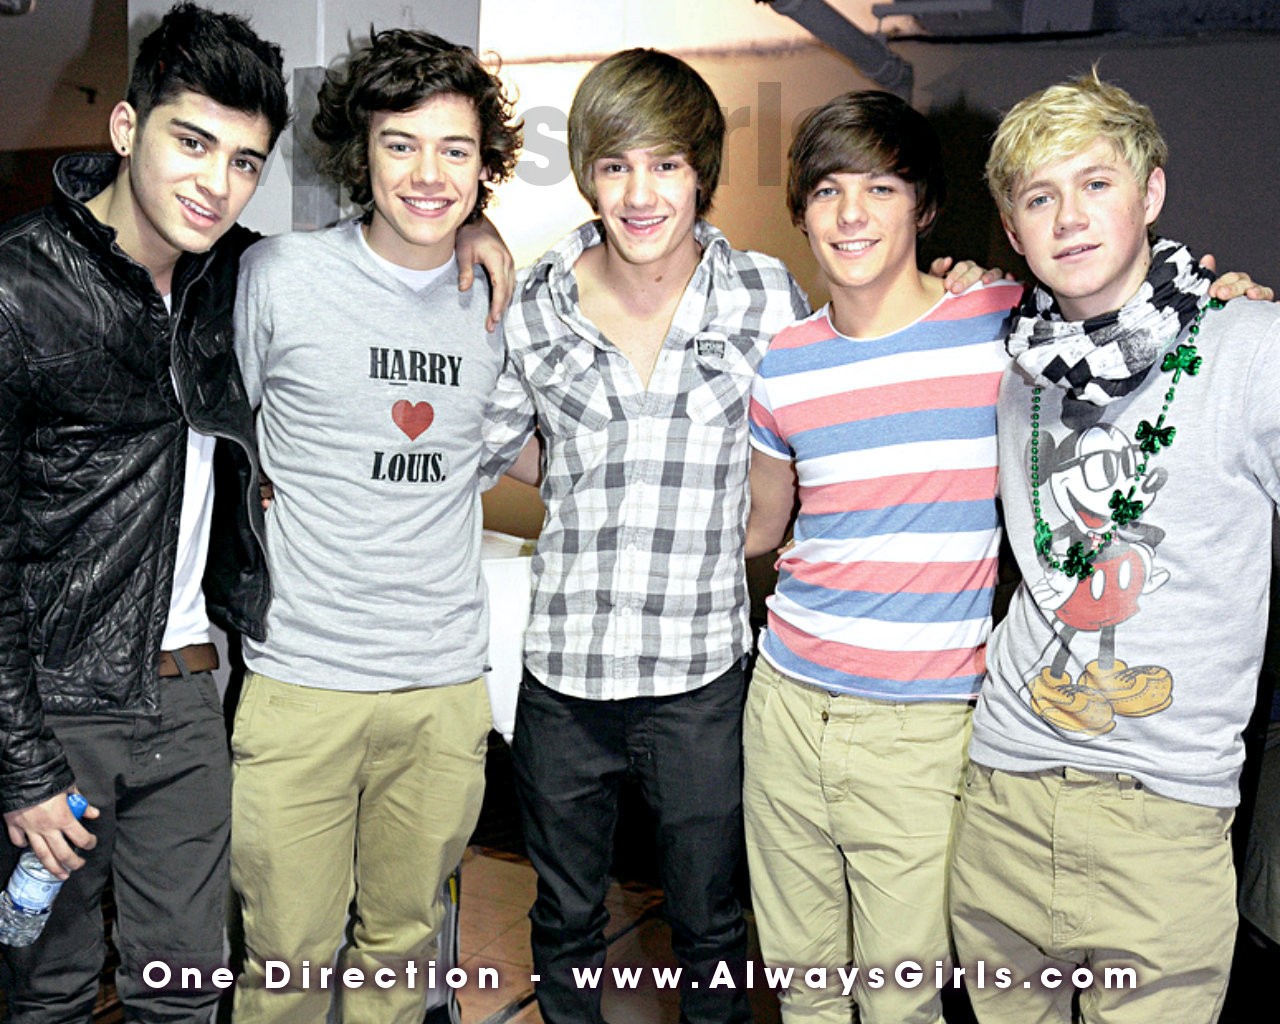 Free Download One Direction Wallpaper Collection Of Wallpapers For 1d